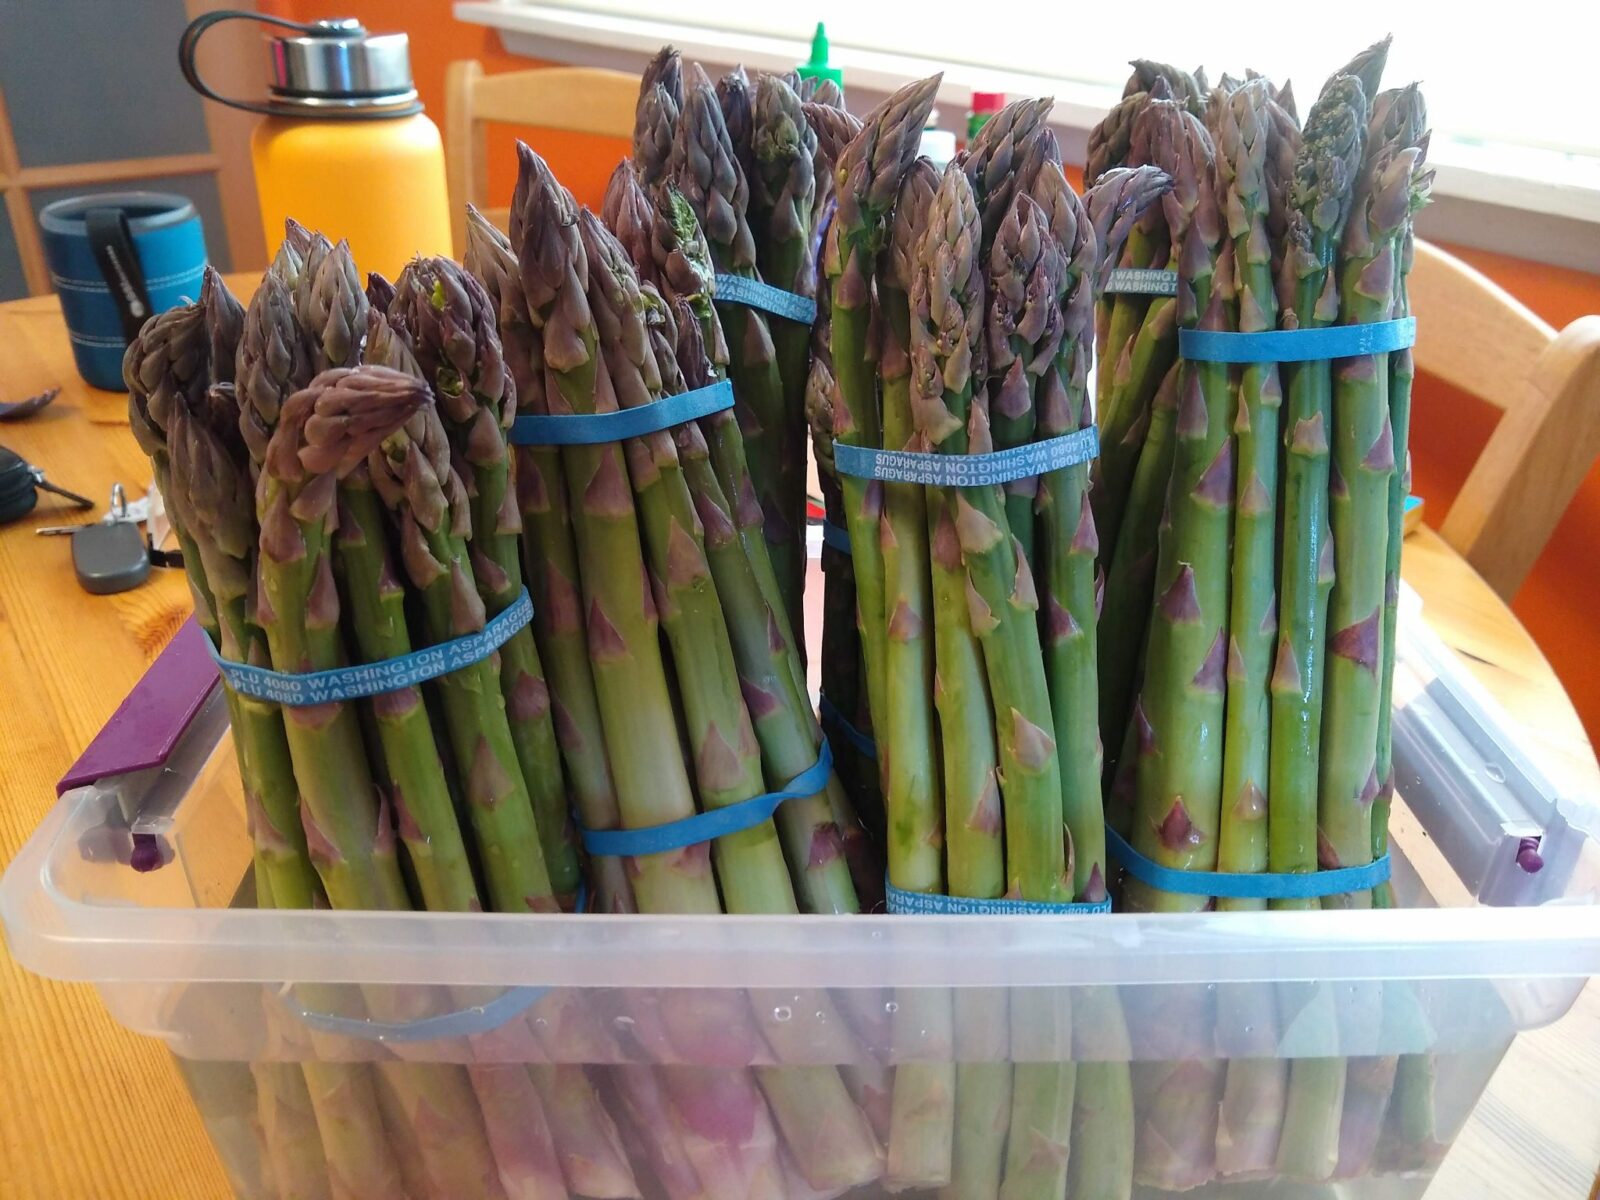 Bundles of asparagus stand up in a plastic container filled with water